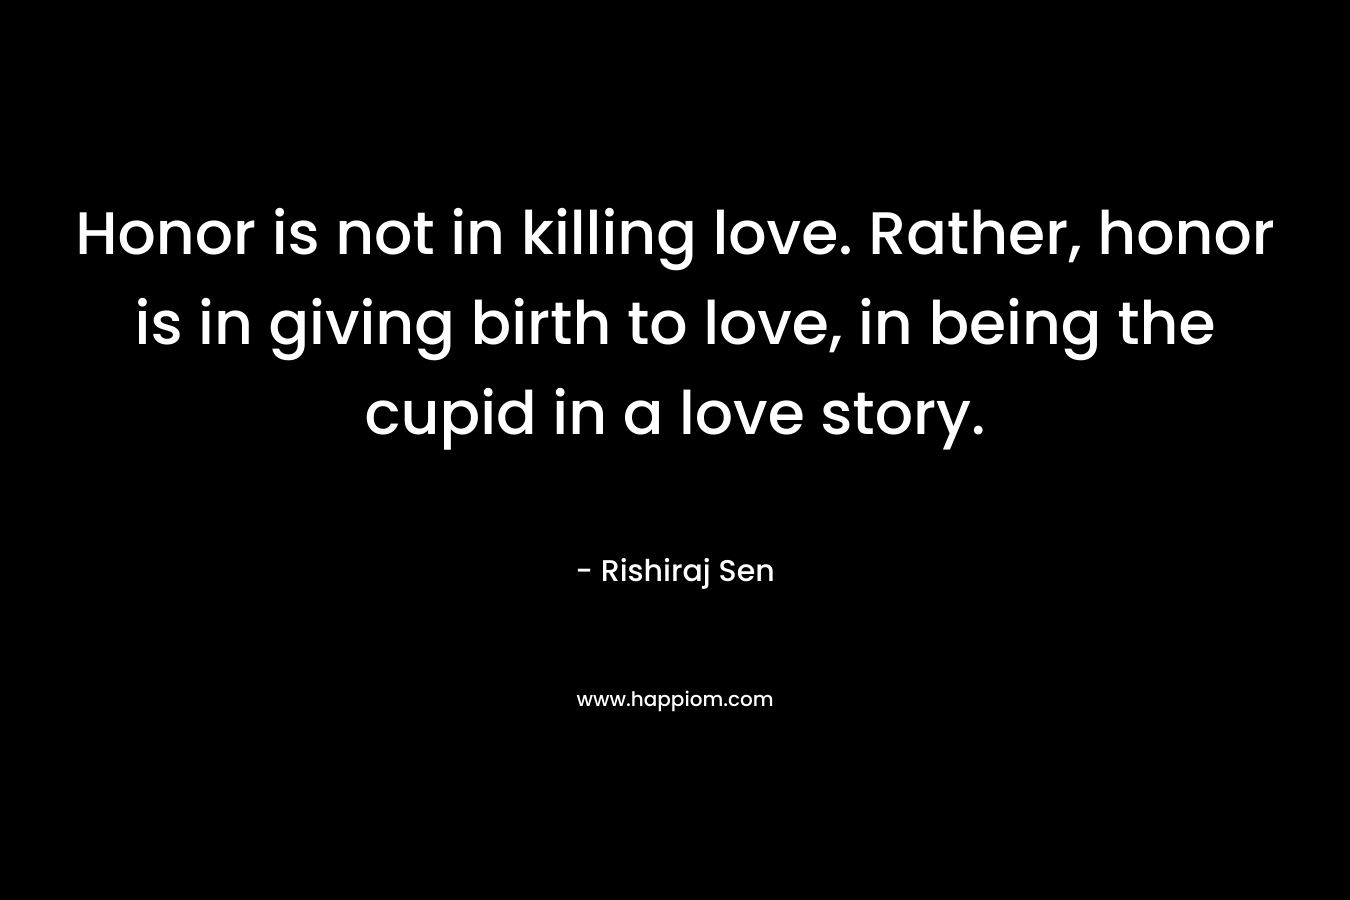 Honor is not in killing love. Rather, honor is in giving birth to love, in being the cupid in a love story.